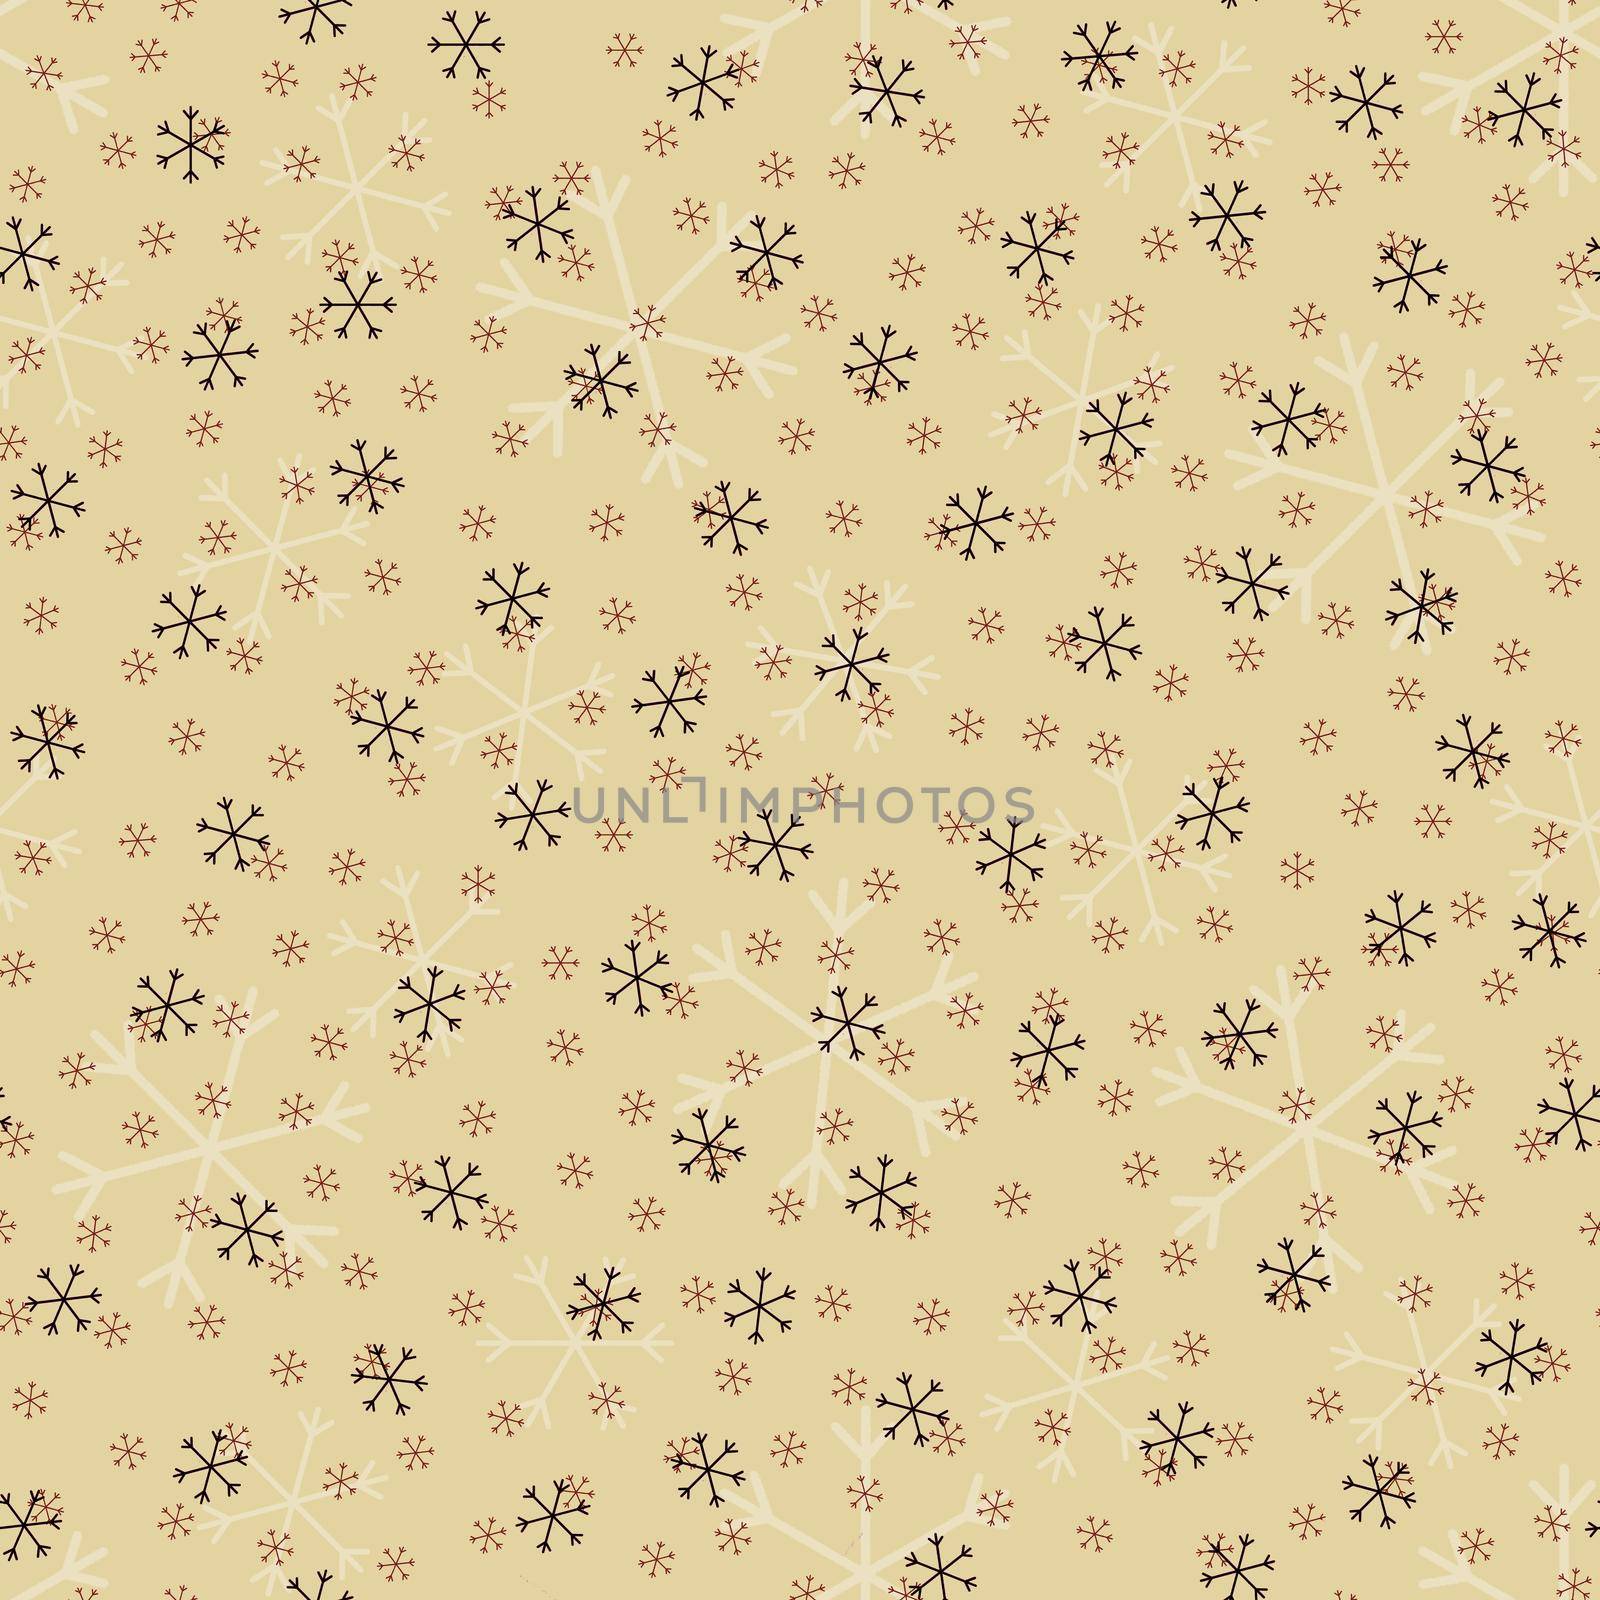 Seamless Christmas pattern doodle with hand random drawn snowflakes.Wrapping paper for presents, funny textile fabric print, design, decor, food wrap, backgrounds. new year.Raster copy.Beige black